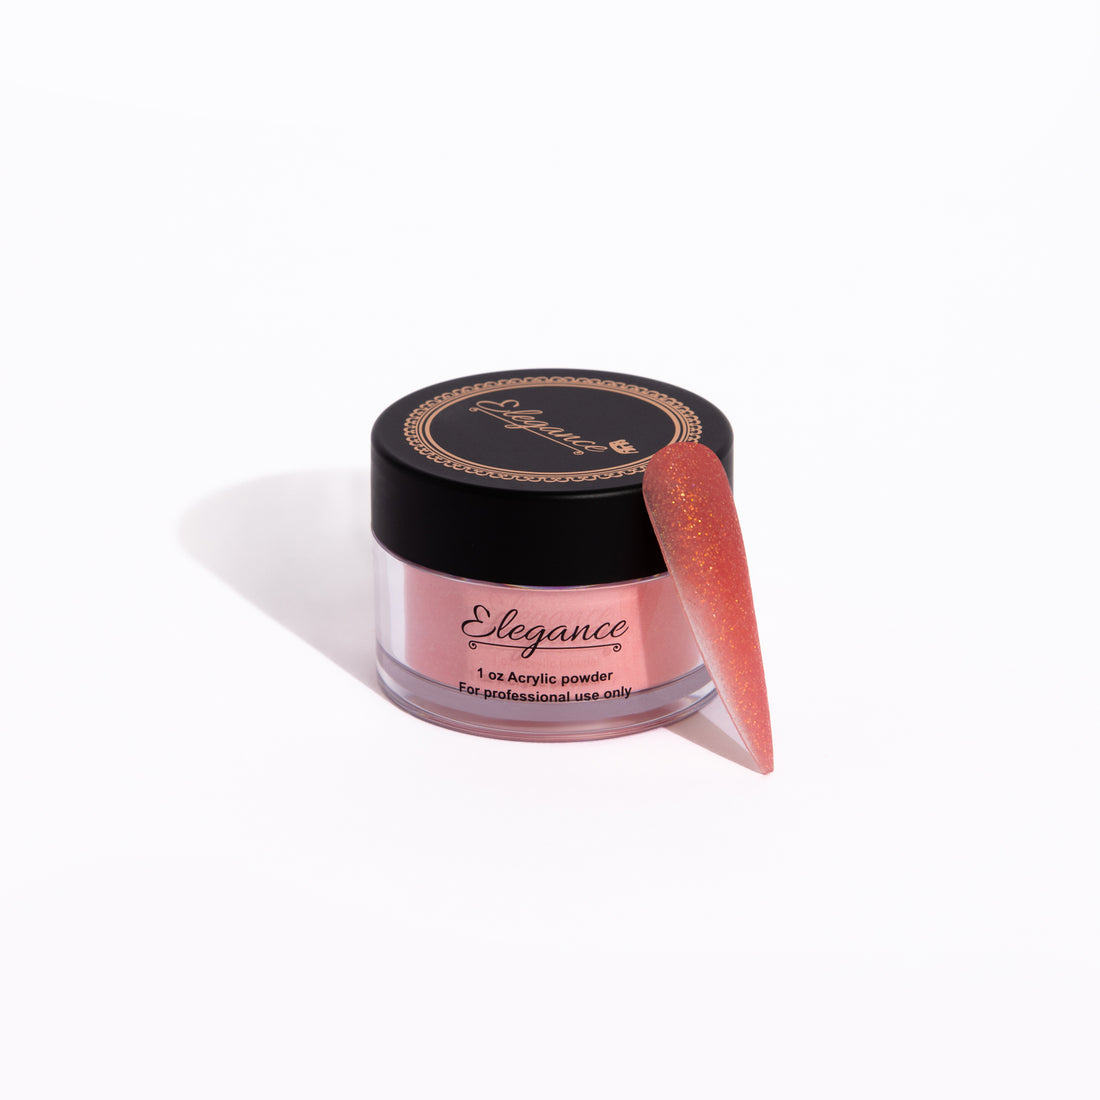 The Shimmer Collection - Sunset Kiss